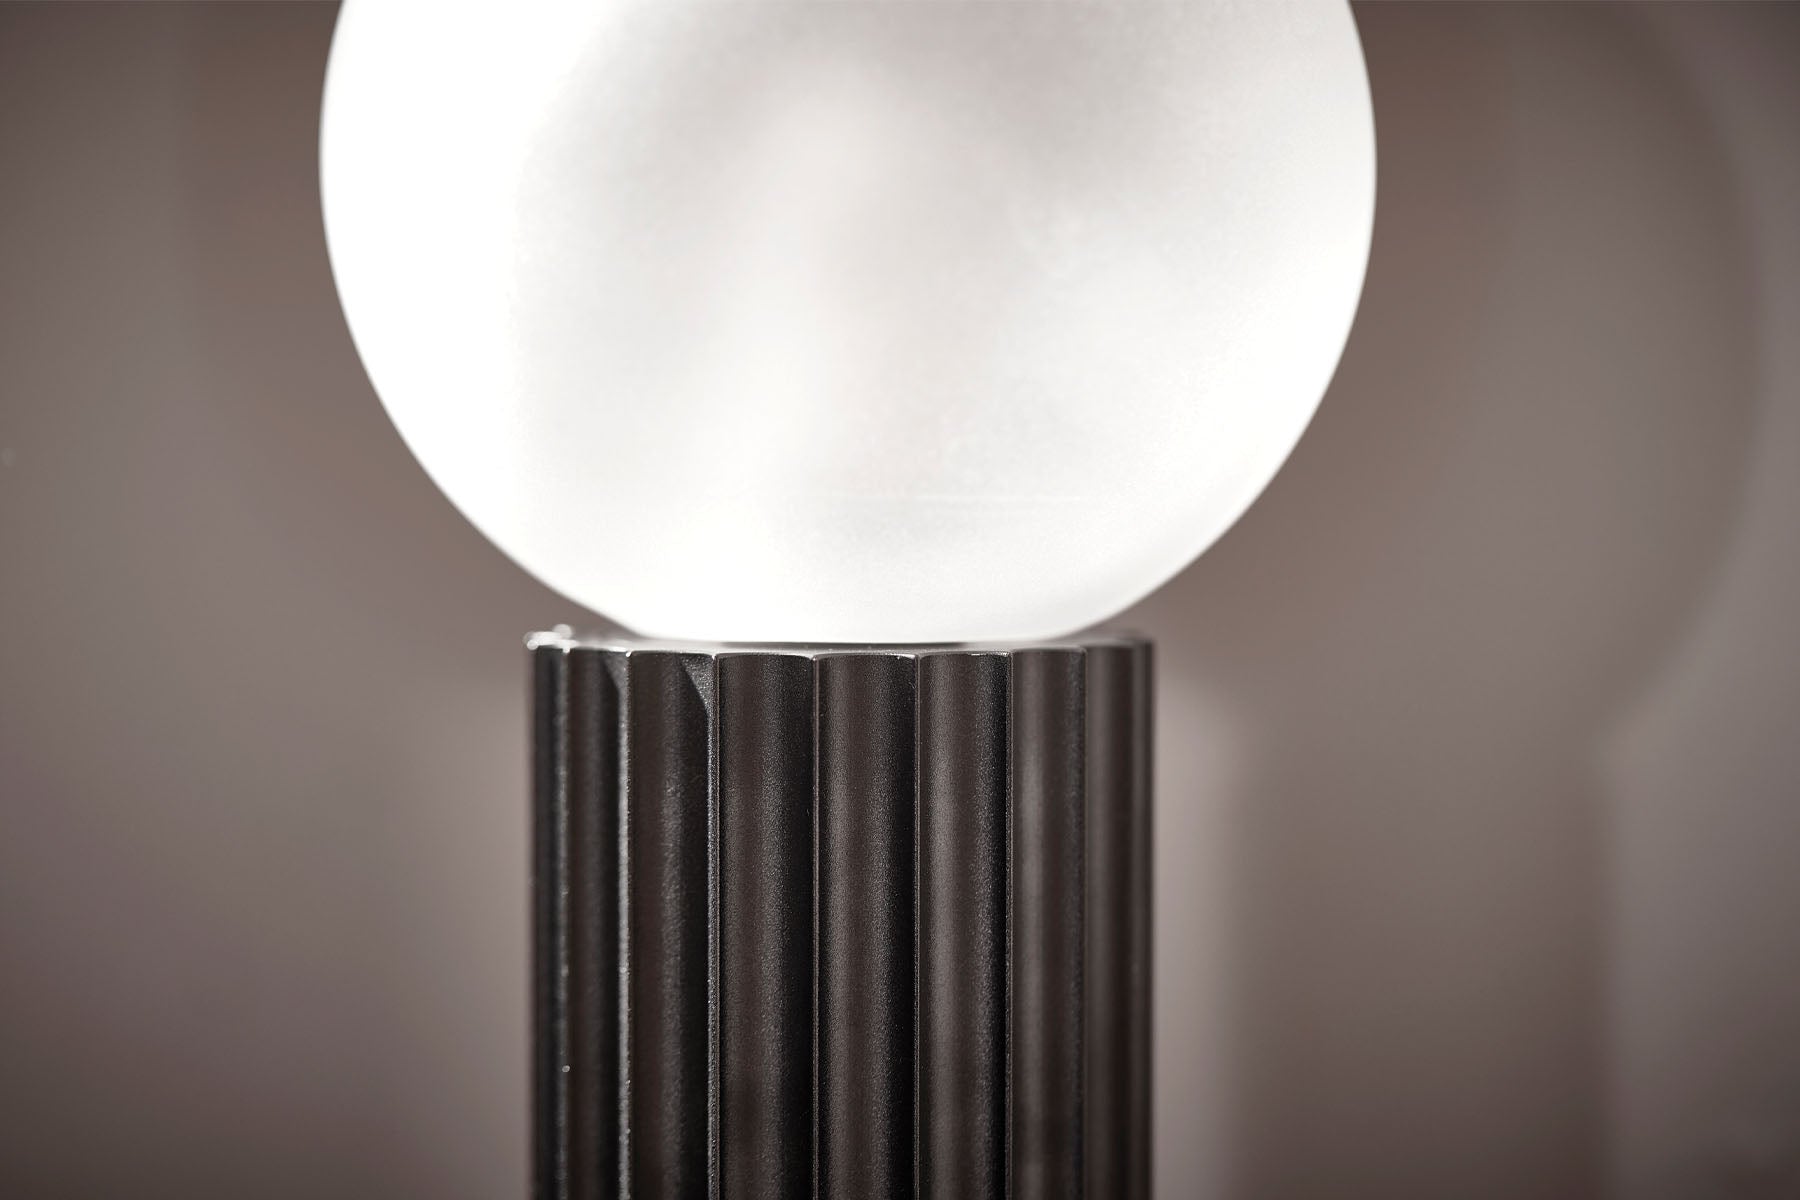 Marz Designs Attalos Table Lamp 95 in Brushed Black, detailed image.